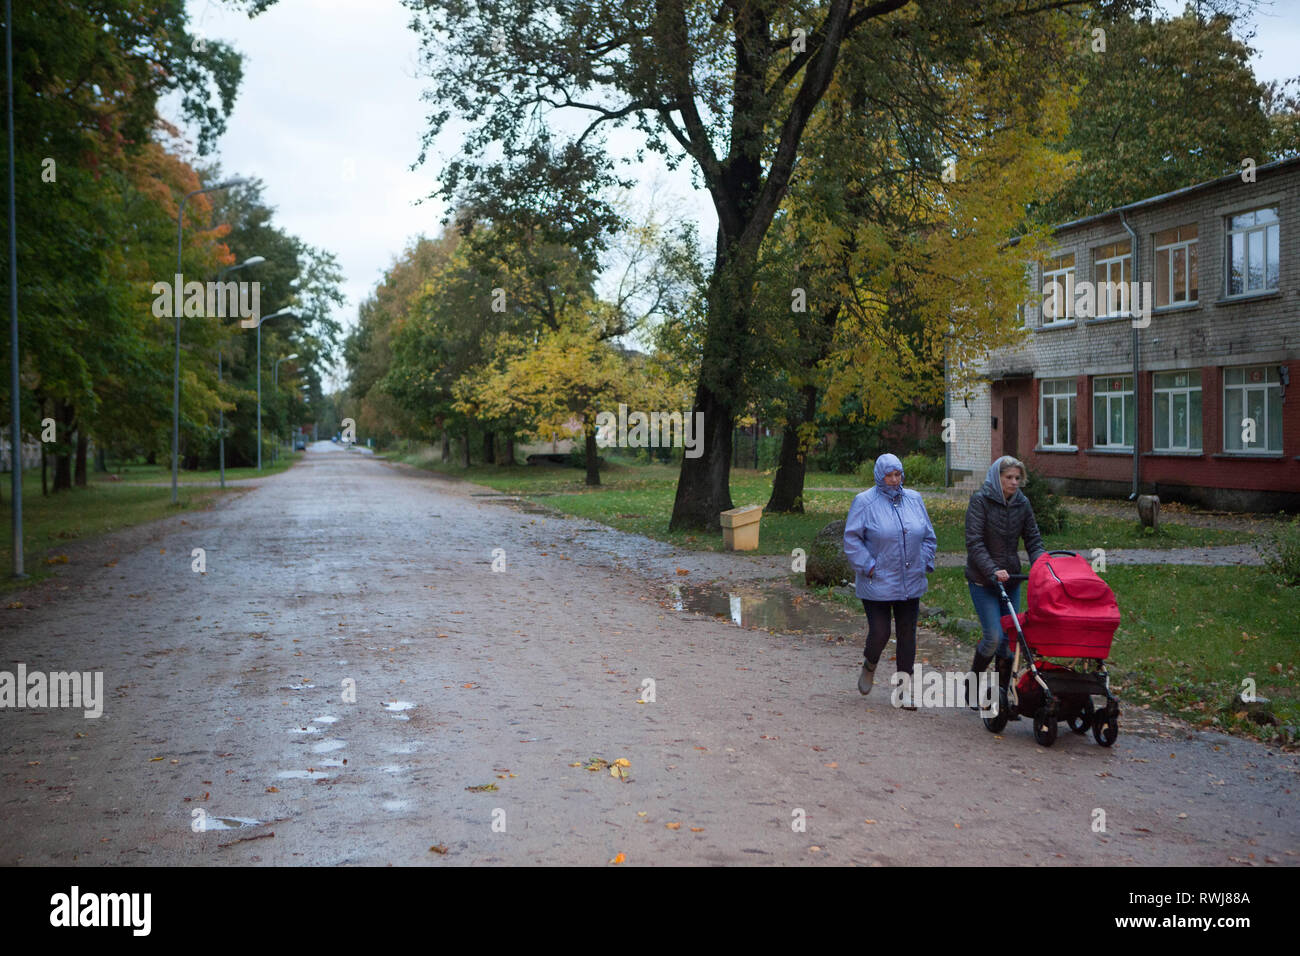 Two women with pushchair walking along tree lined road, Latvia Stock Photo